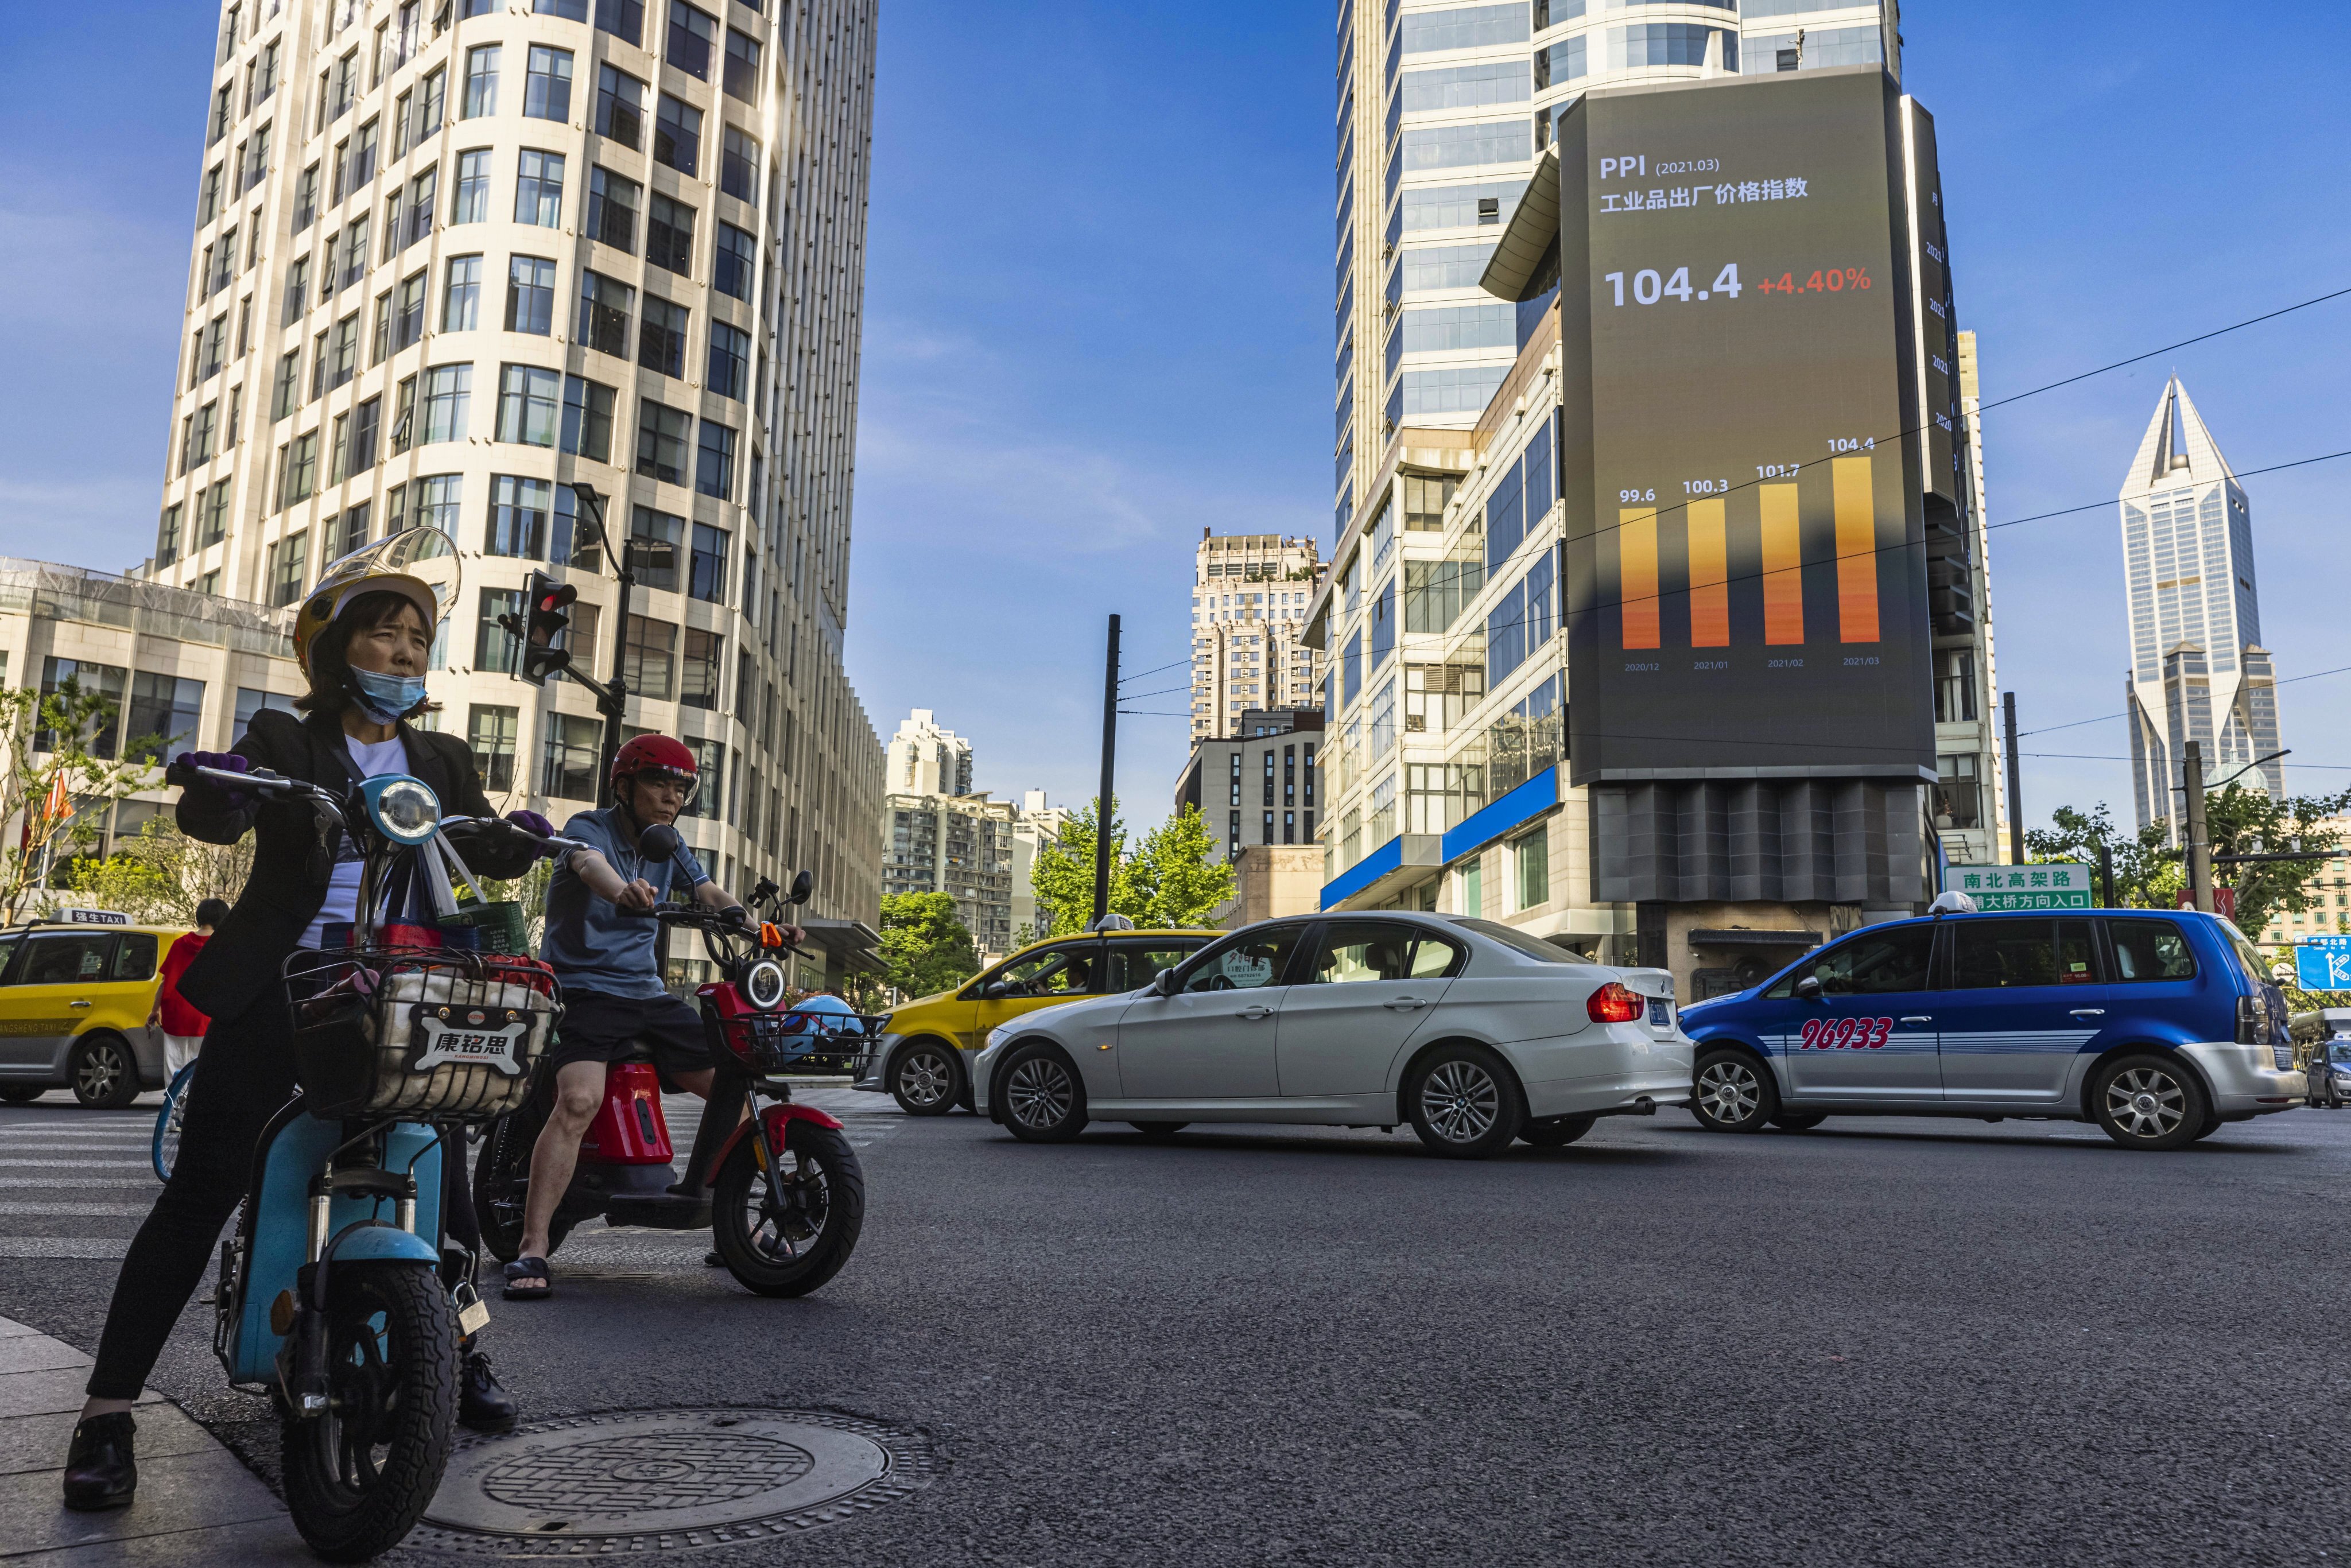 Motorists pass under a large screen showing stock market data in Shanghai on May 10. Photo: EPA-EFE 